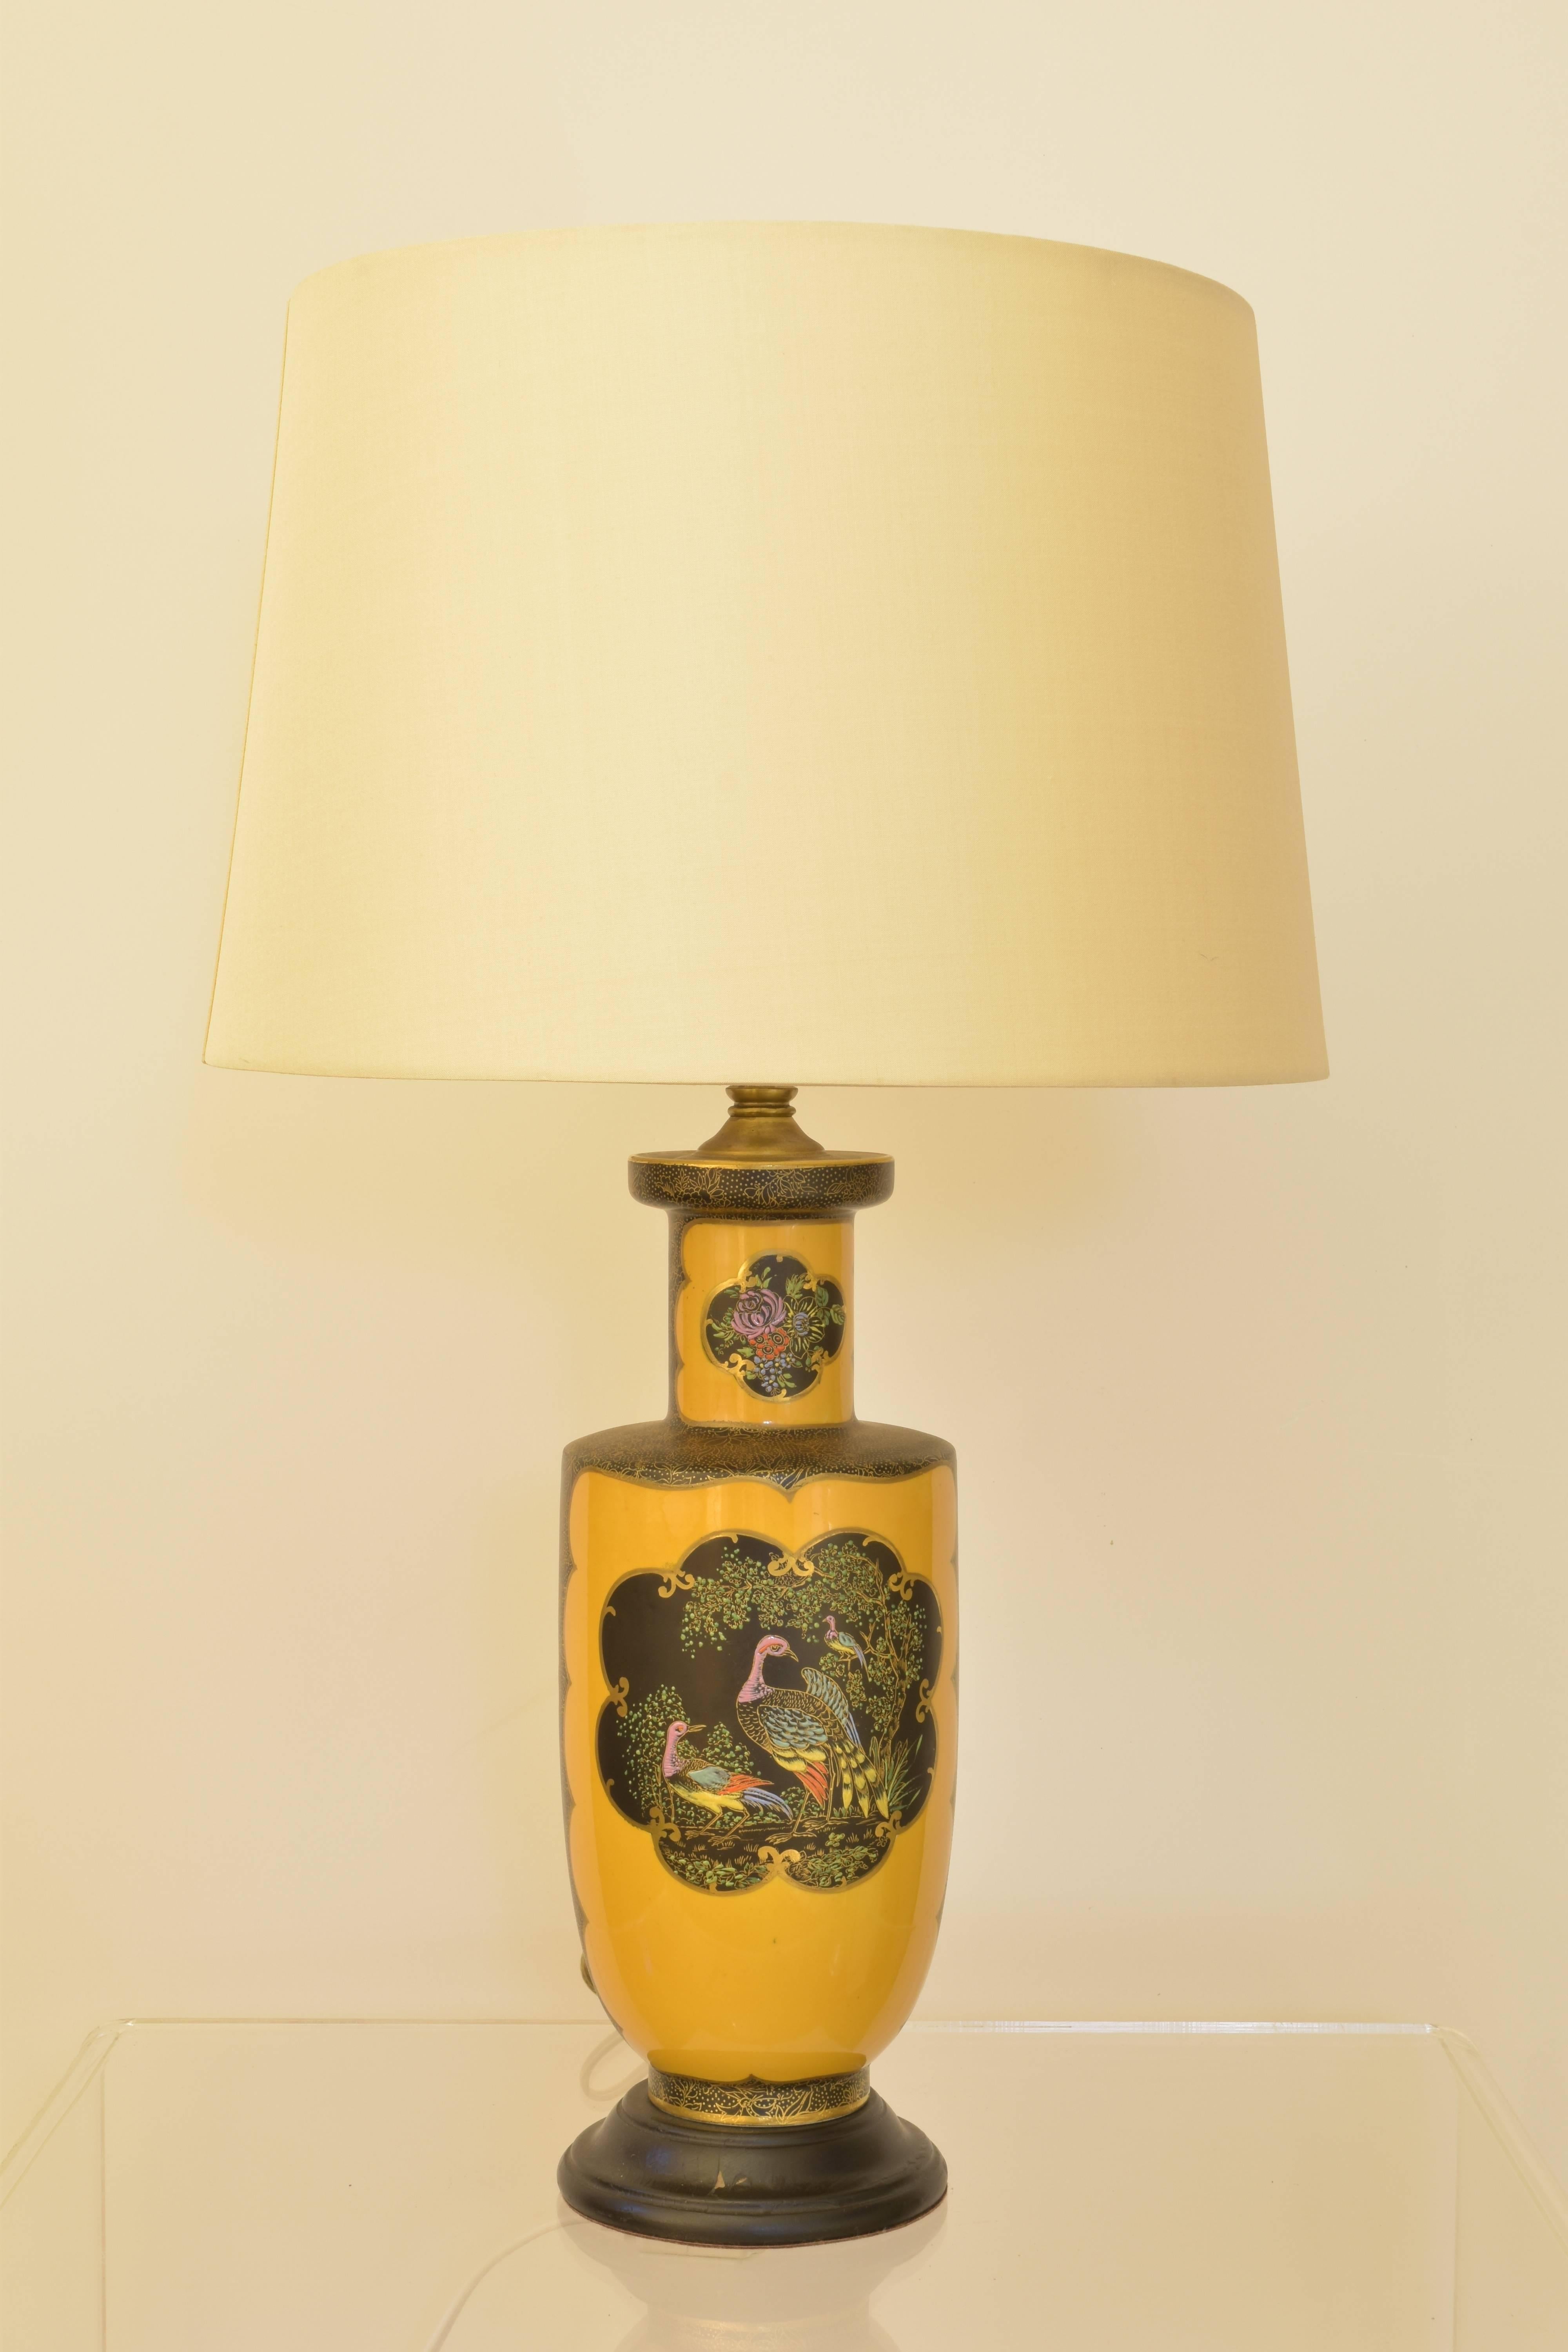 Chinese highly detailed porcelain lamp with painted birds and in a strong golden yellow coloration. 

Lamp measures 24